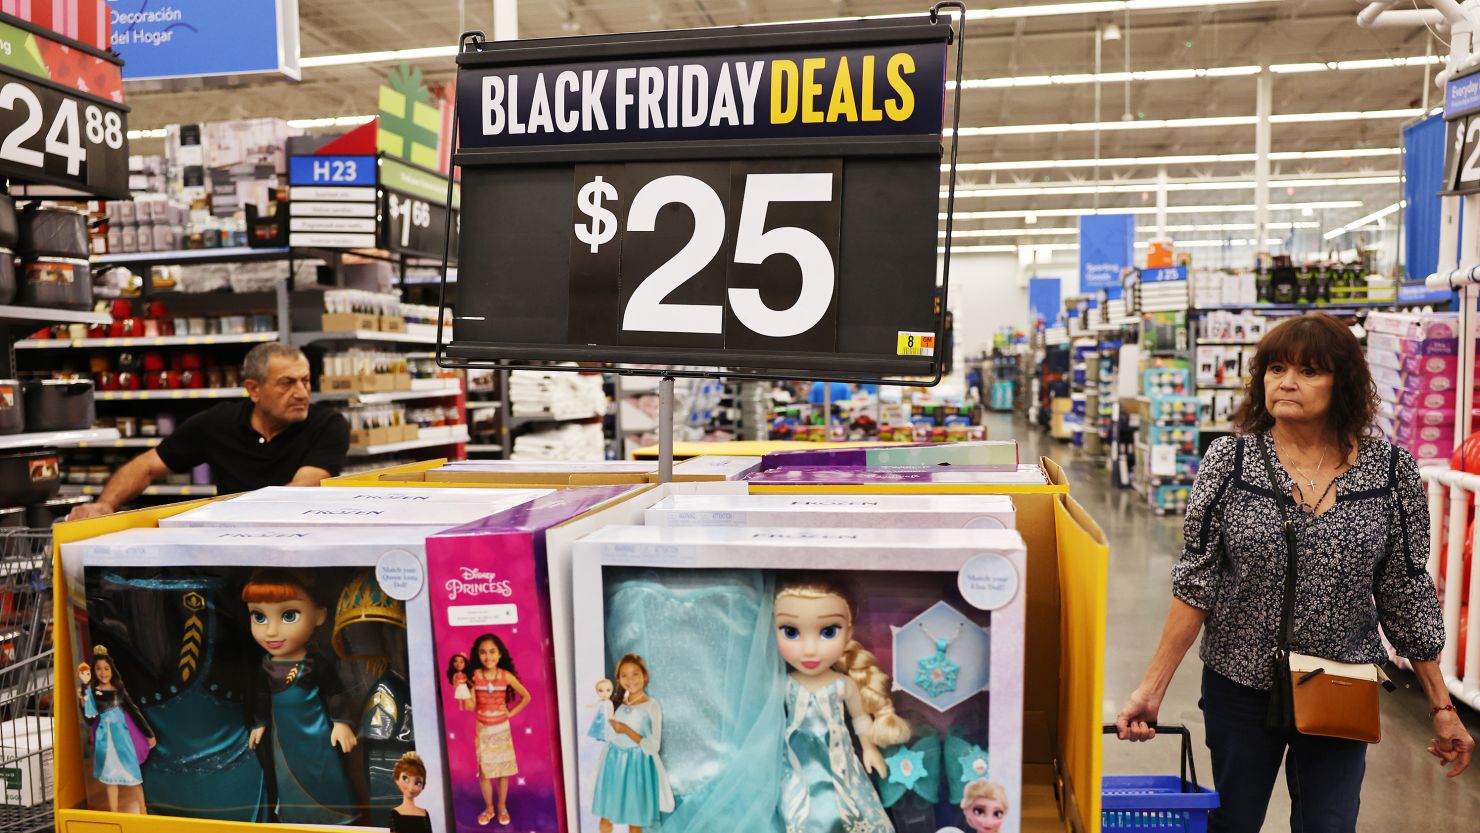 BURBANK, CALIFORNIA - NOVEMBER 14: Disney Princess dolls are displayed for sale ahead of Black Friday at a Walmart Supercenter on November 14, 2023 in Burbank, California. Some early Black Friday deals are already in place at Walmart and other retailers ahead of Thanksgiving and the traditional holiday shopping season. (Photo by Mario Tama/Getty Images)